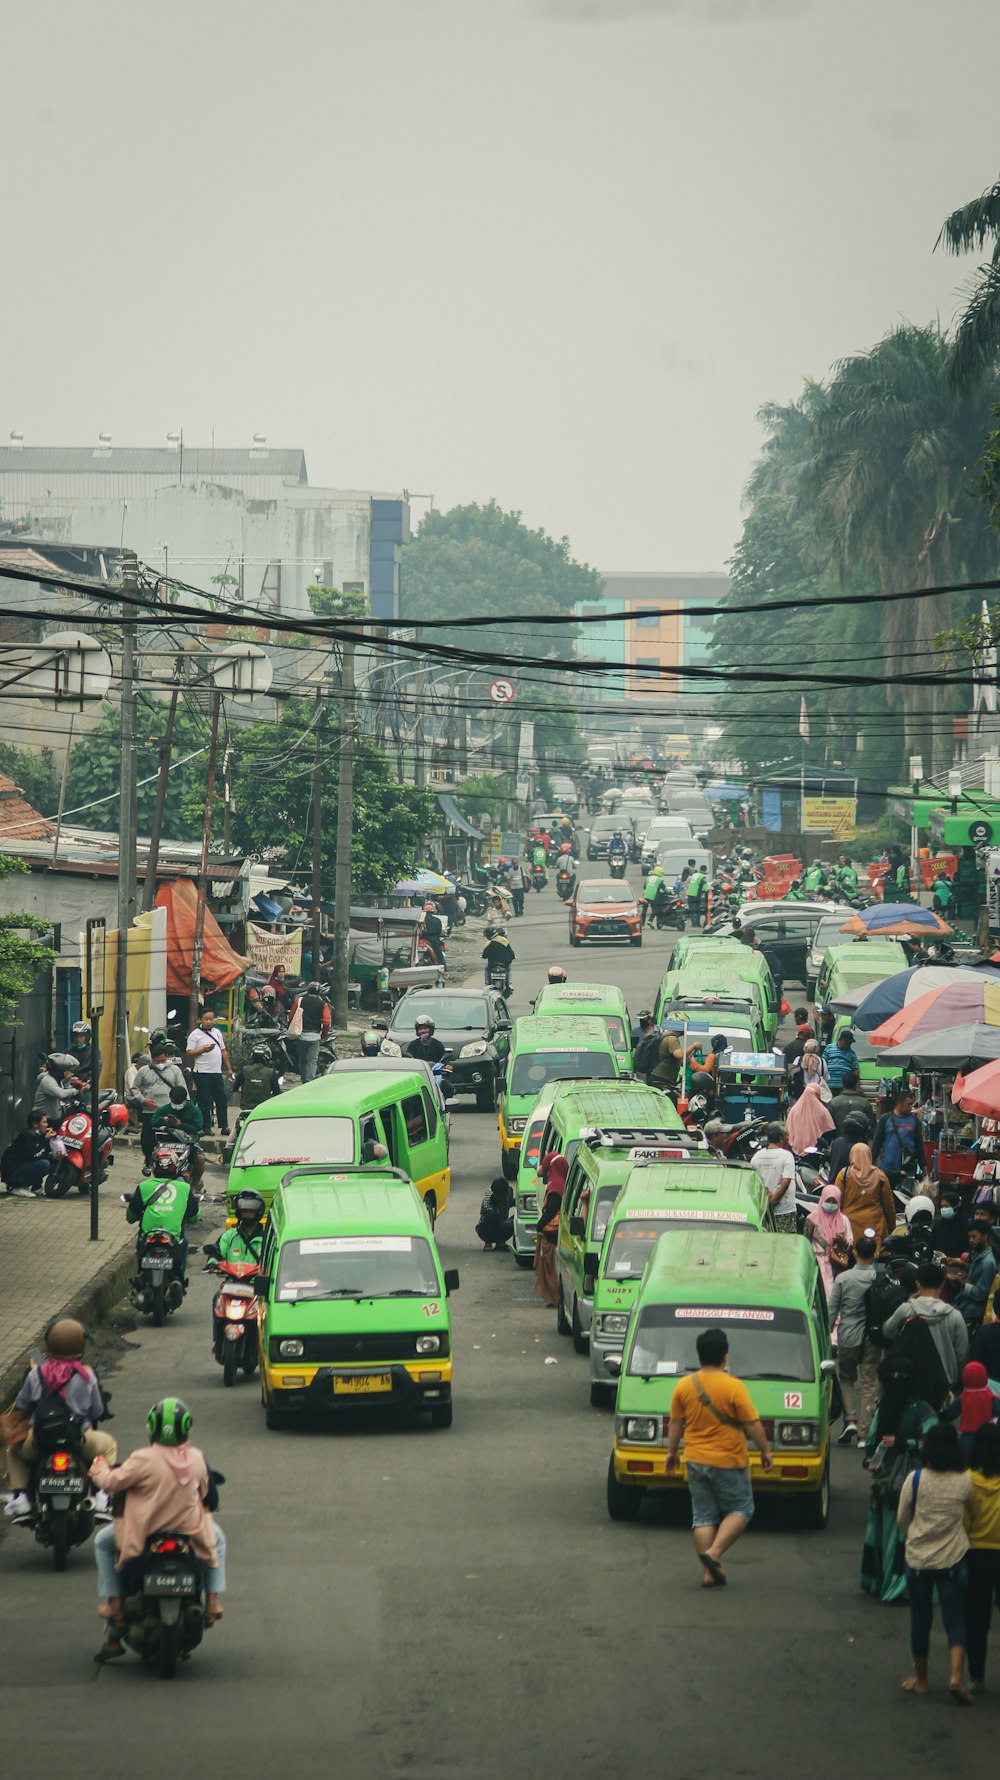 a busy street filled with lots of traffic